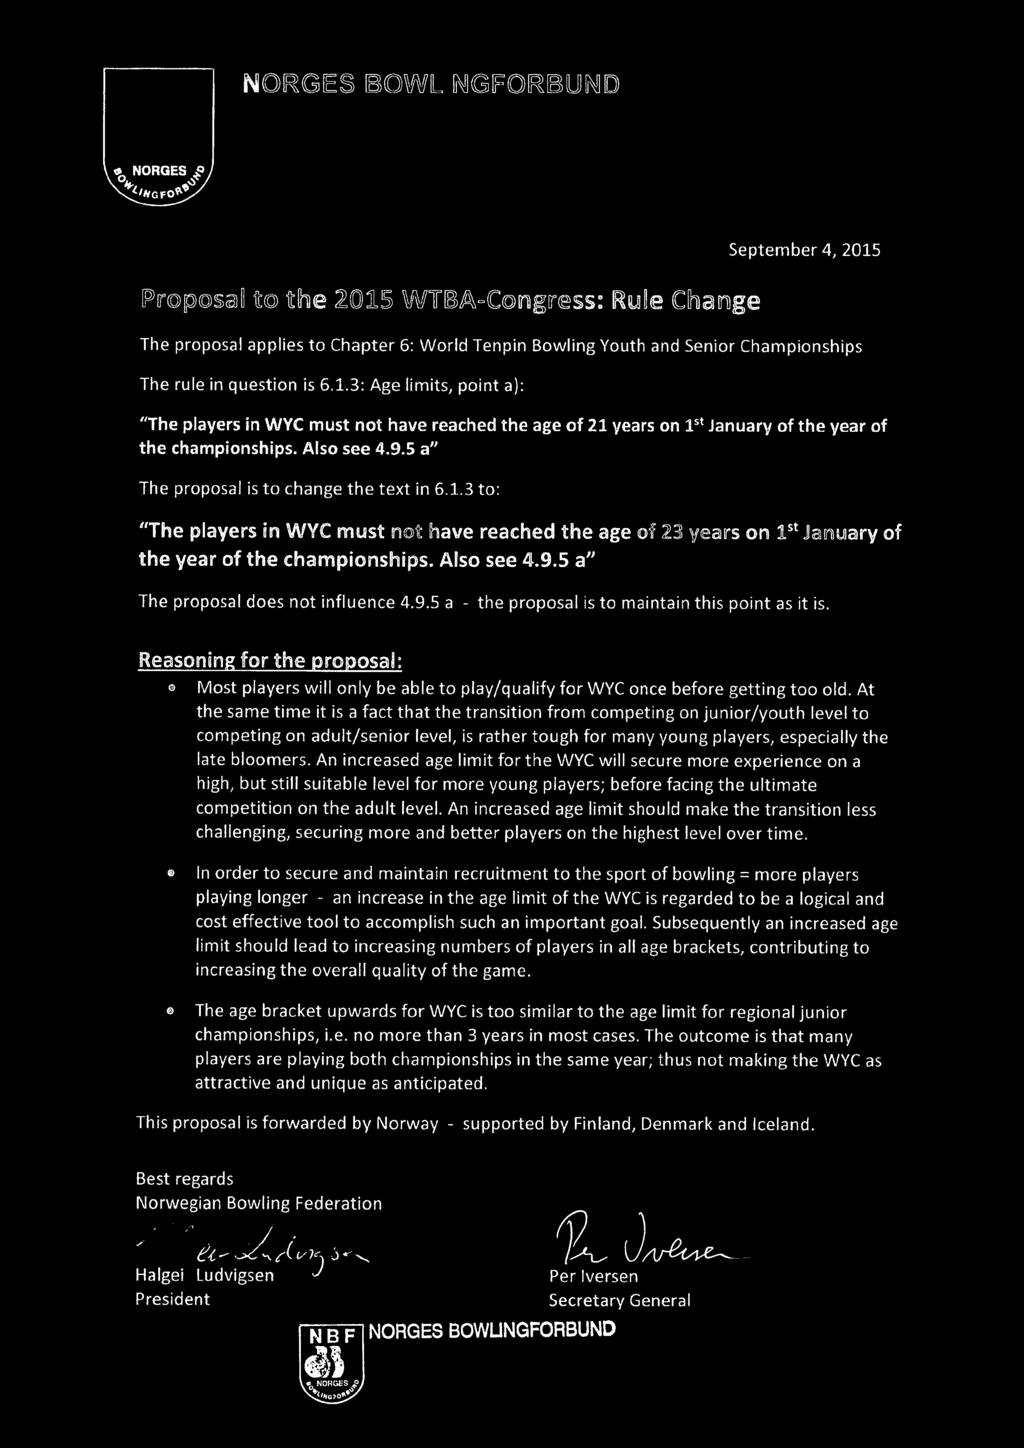 5 a" The proposal is to change the text in 6.1.3 to: "The players in WYC must not have reached the age of 23 years on 1st January of the year of the championships. Also see 4.9.